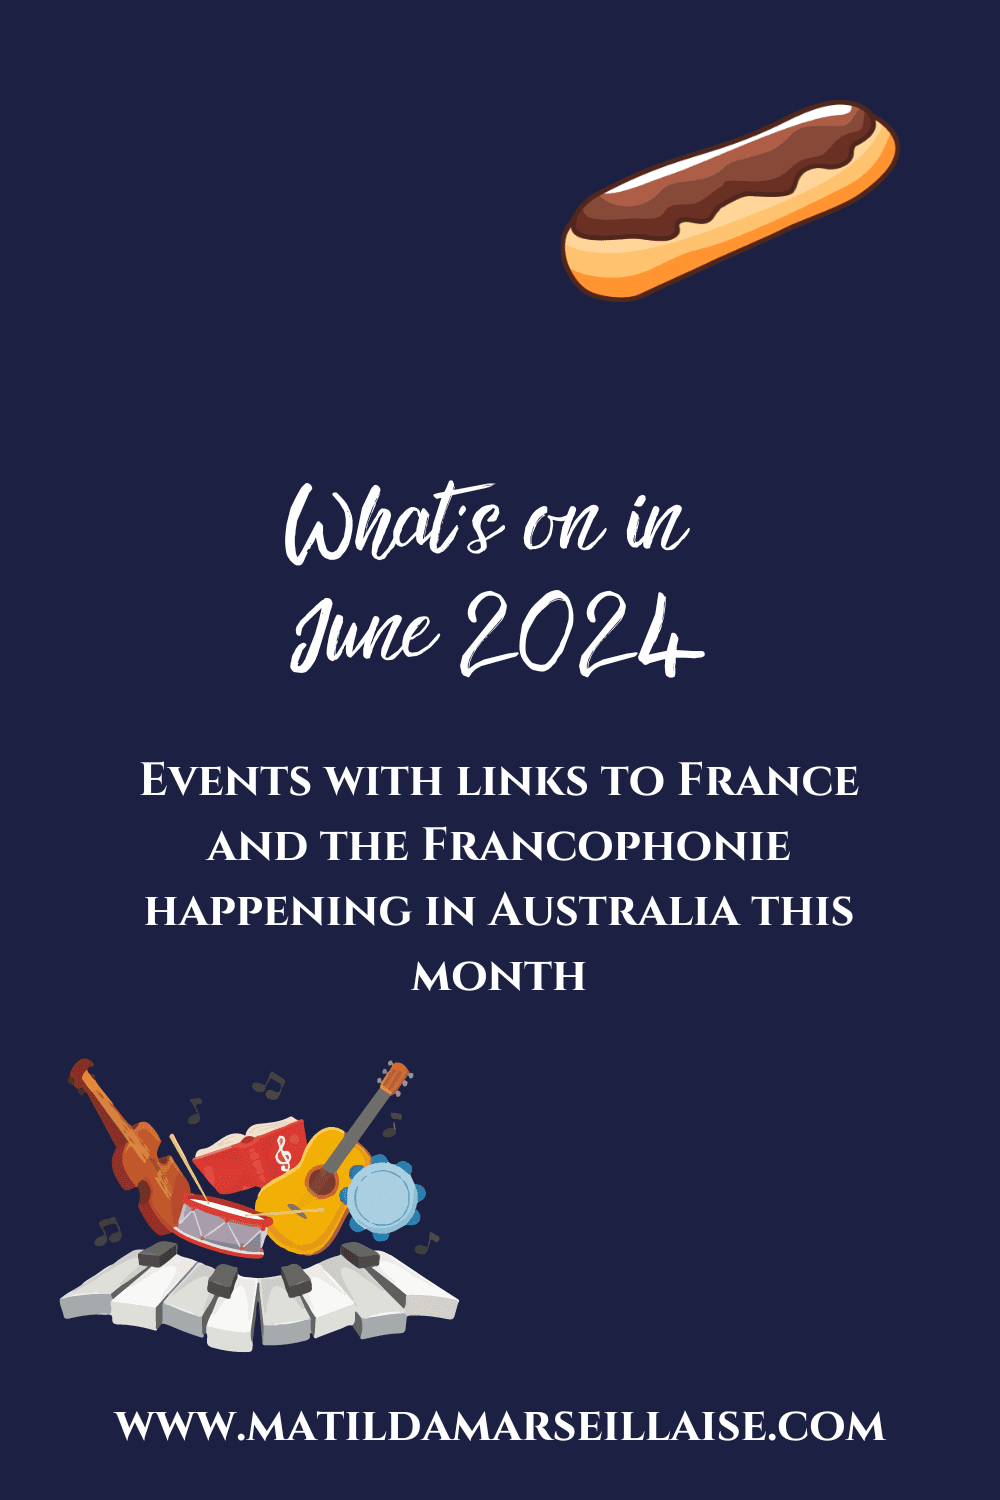 What’s on in June 2024? Events with links to France and the Francophonie happening in Australia